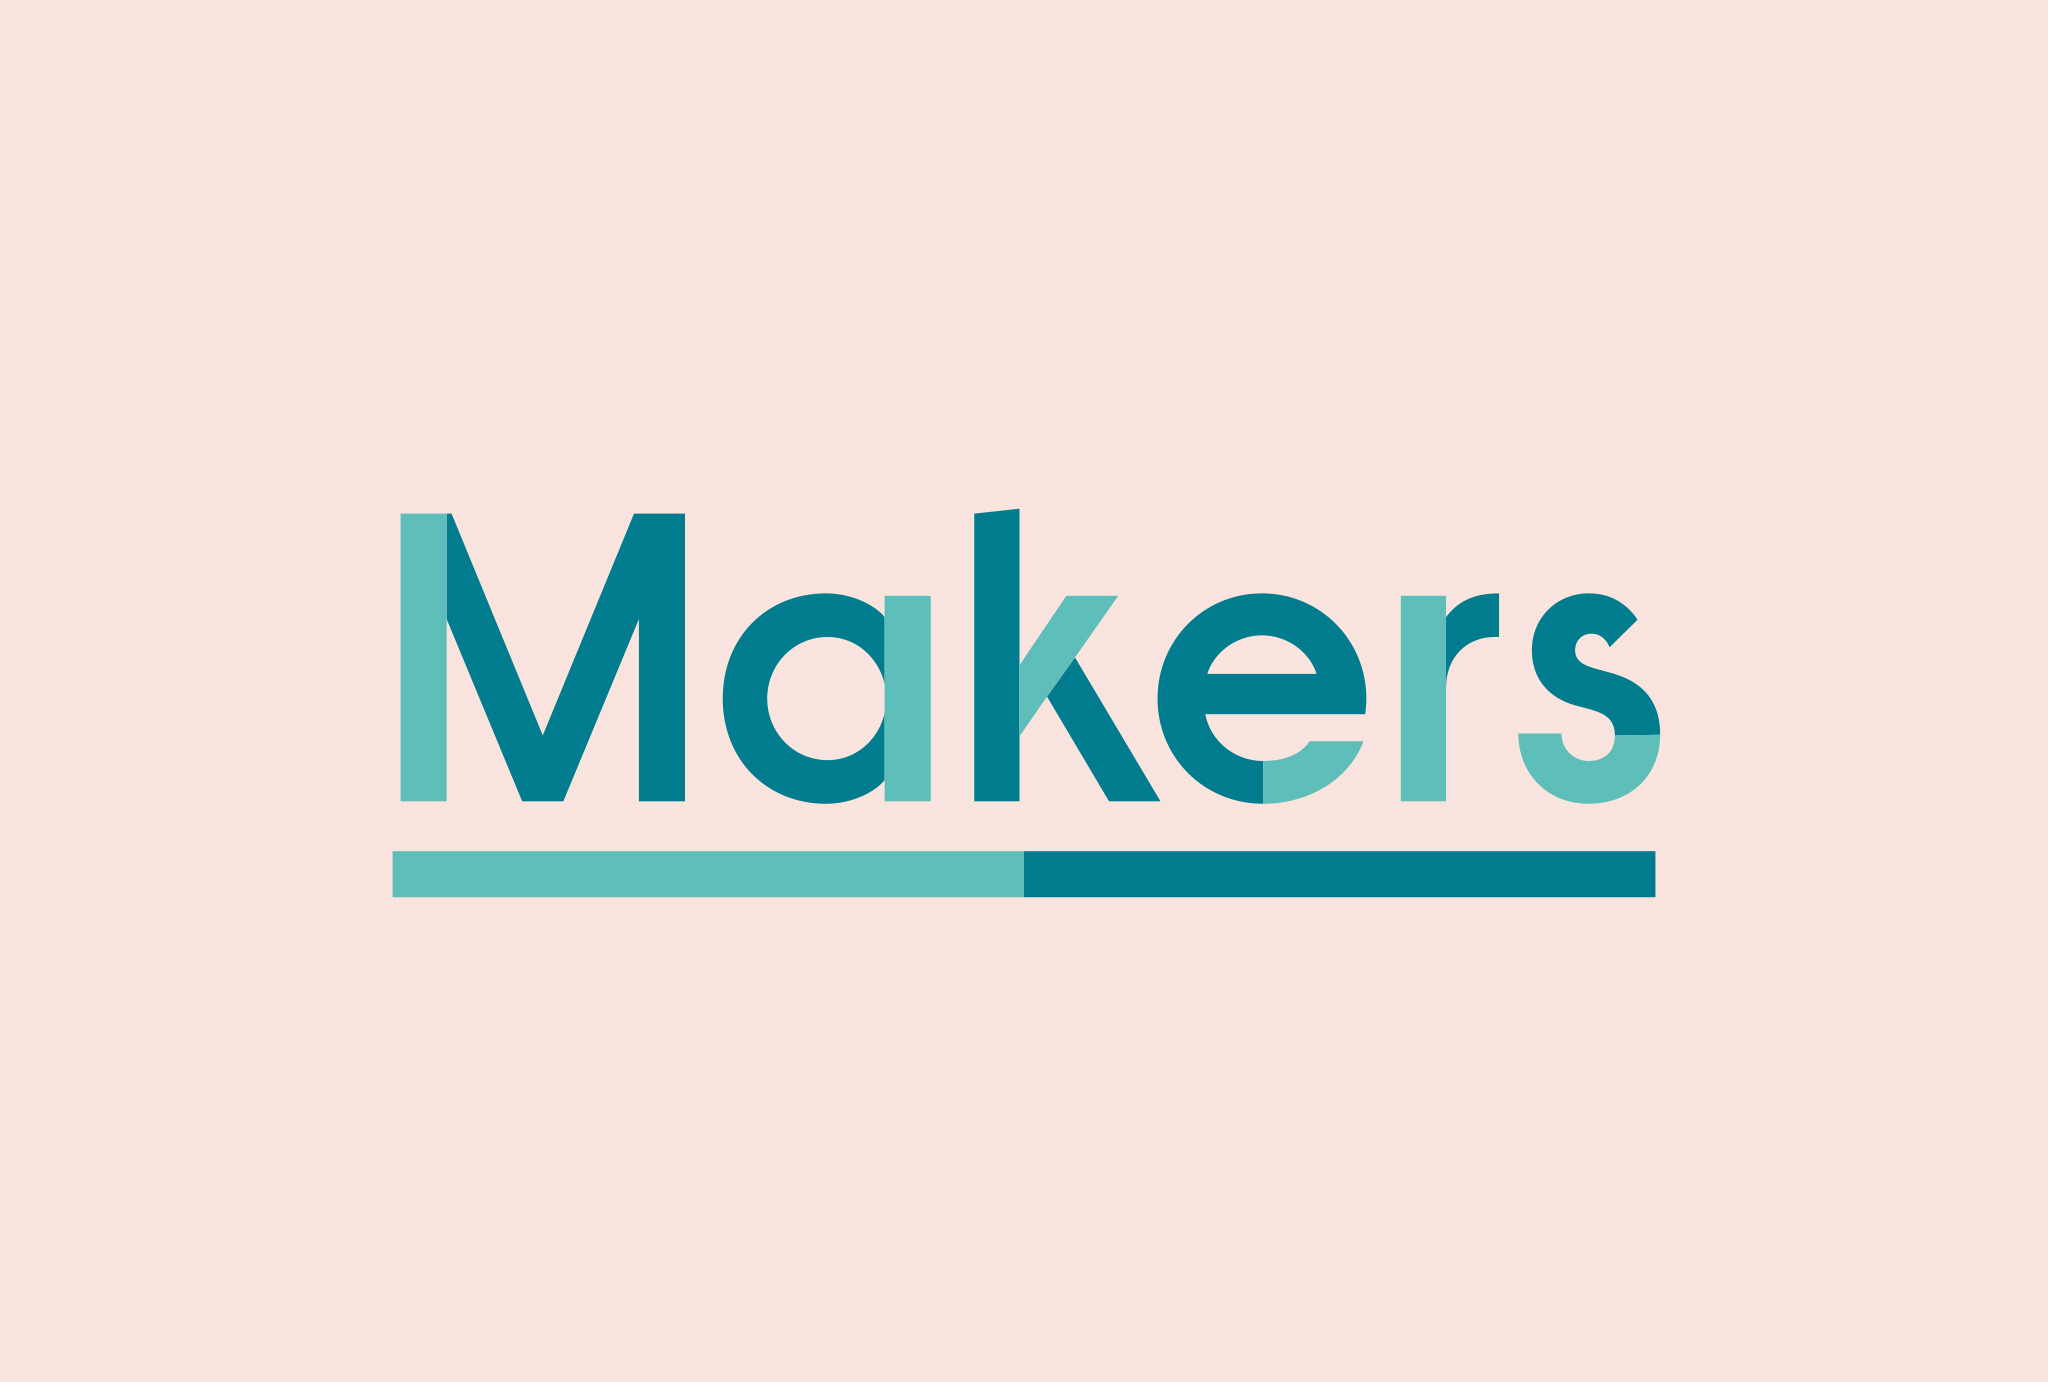 ‘Makers’ logo written in light and dark turquoise on a rose background